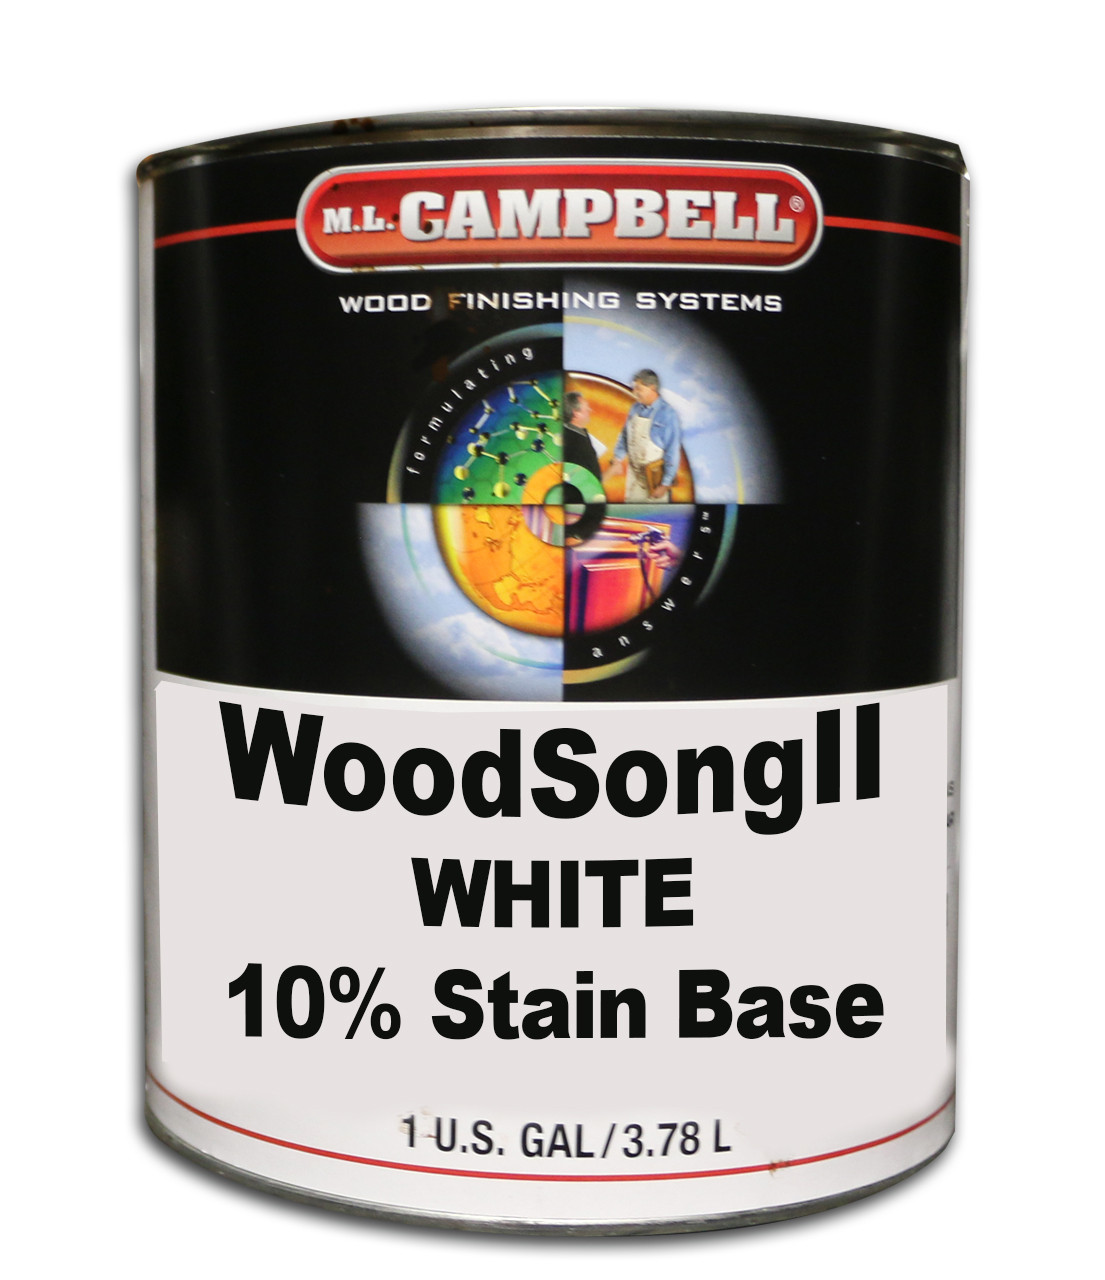 ML Campbell White Woodsong II 10% Stain Gallon